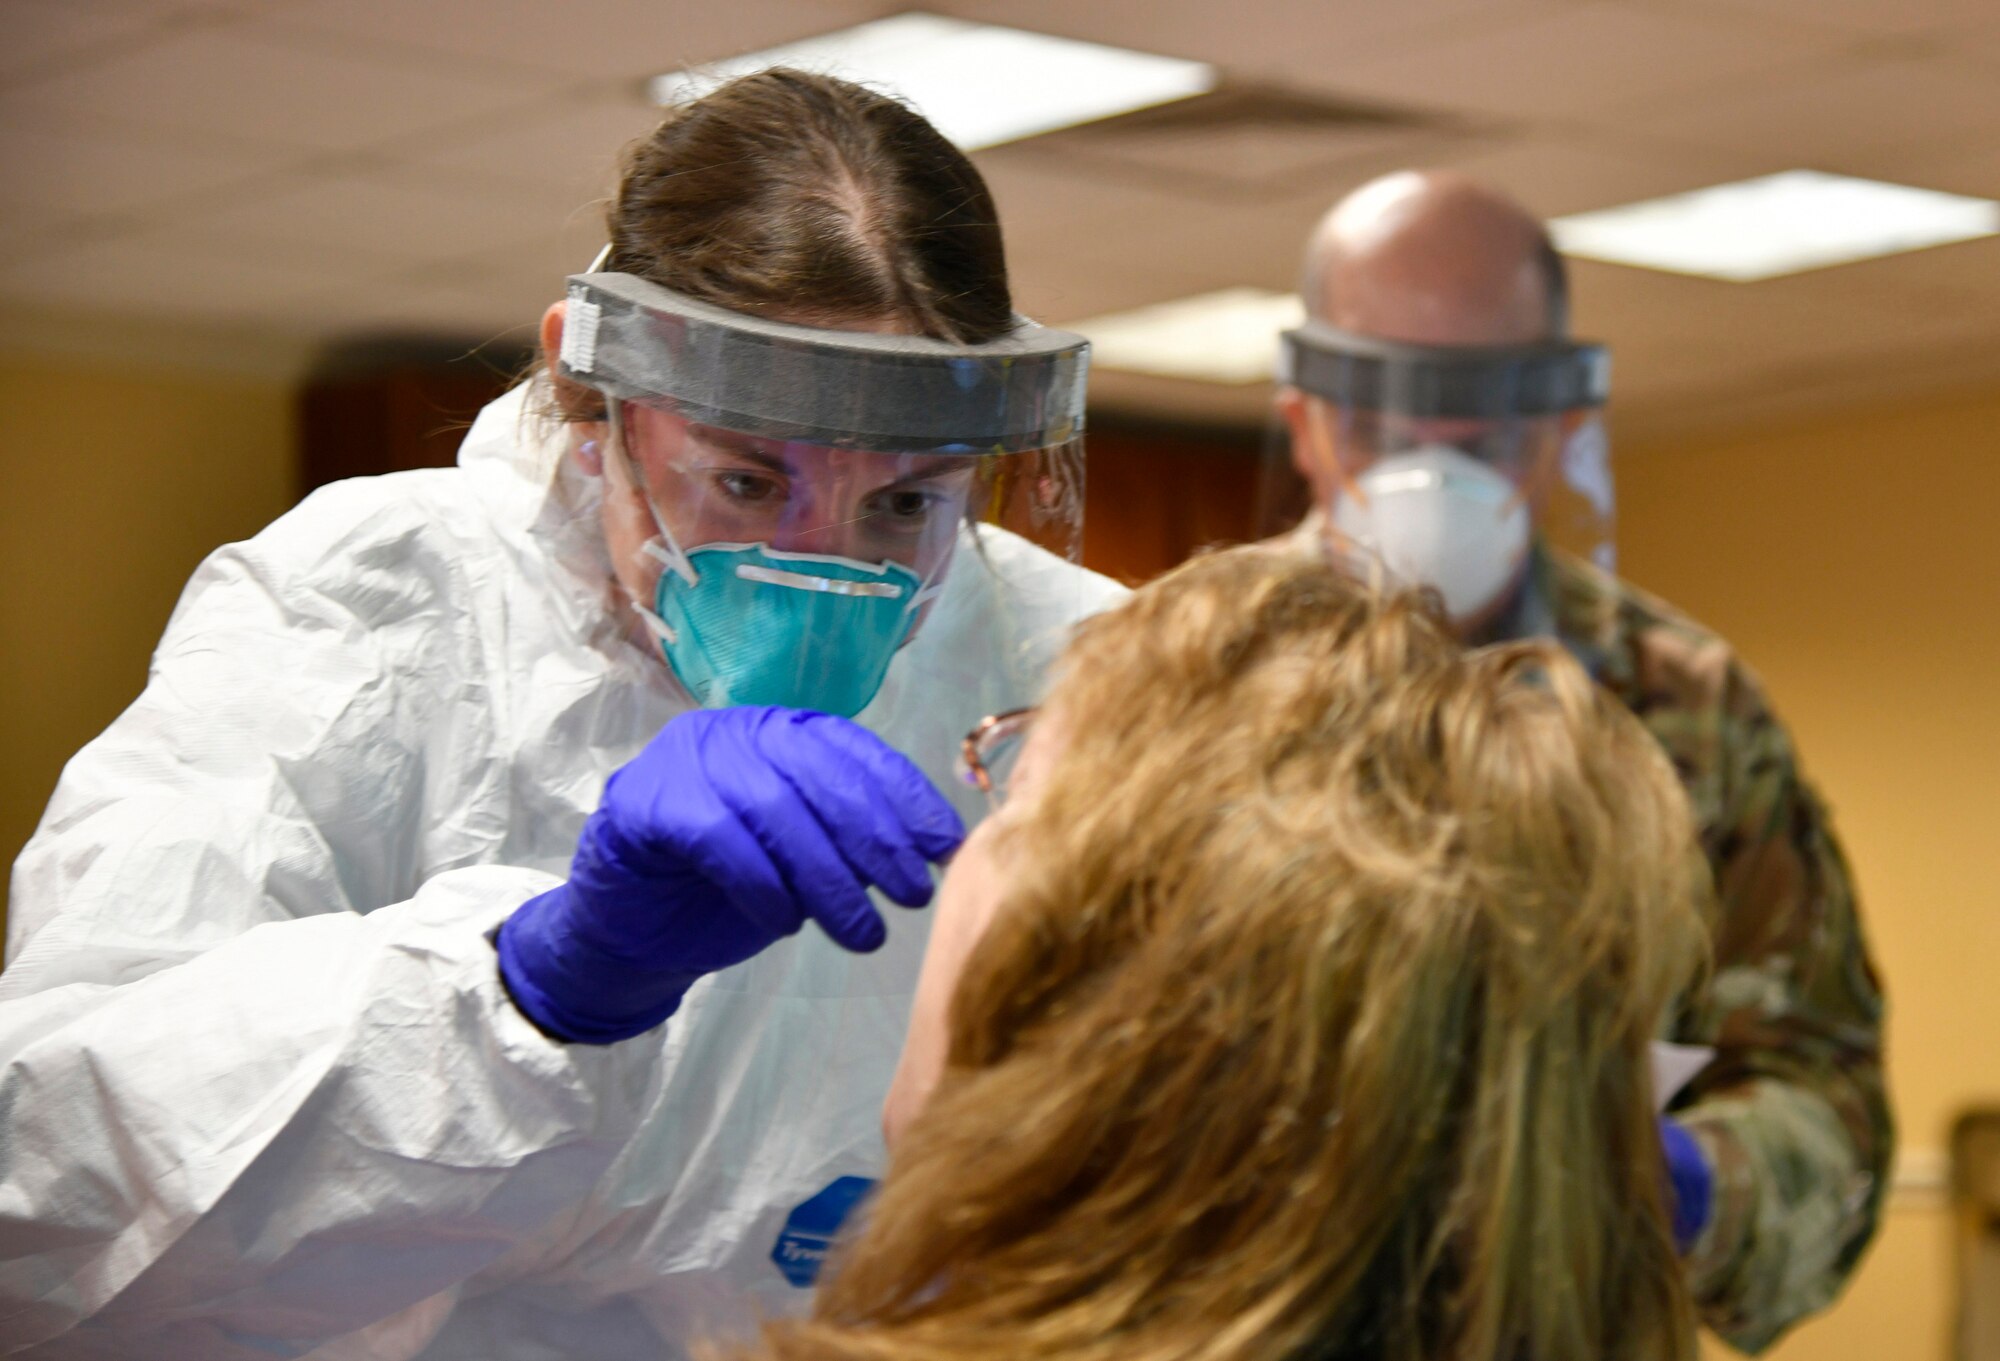 U.S. Air Force Tech. Sgt. Danielle Fary, 110th Medical Group, 110th Attack Wing, Michigan Air National Guard, conducts COVID-19 testing of employees at Riveridge Rehabilitation and Healthcare Center, Niles, Michigan, May 28, 2020. As of May, more than 1,000 Michigan Guard Soldiers and Airmen were actively supporting the state’s COVD-19 response.